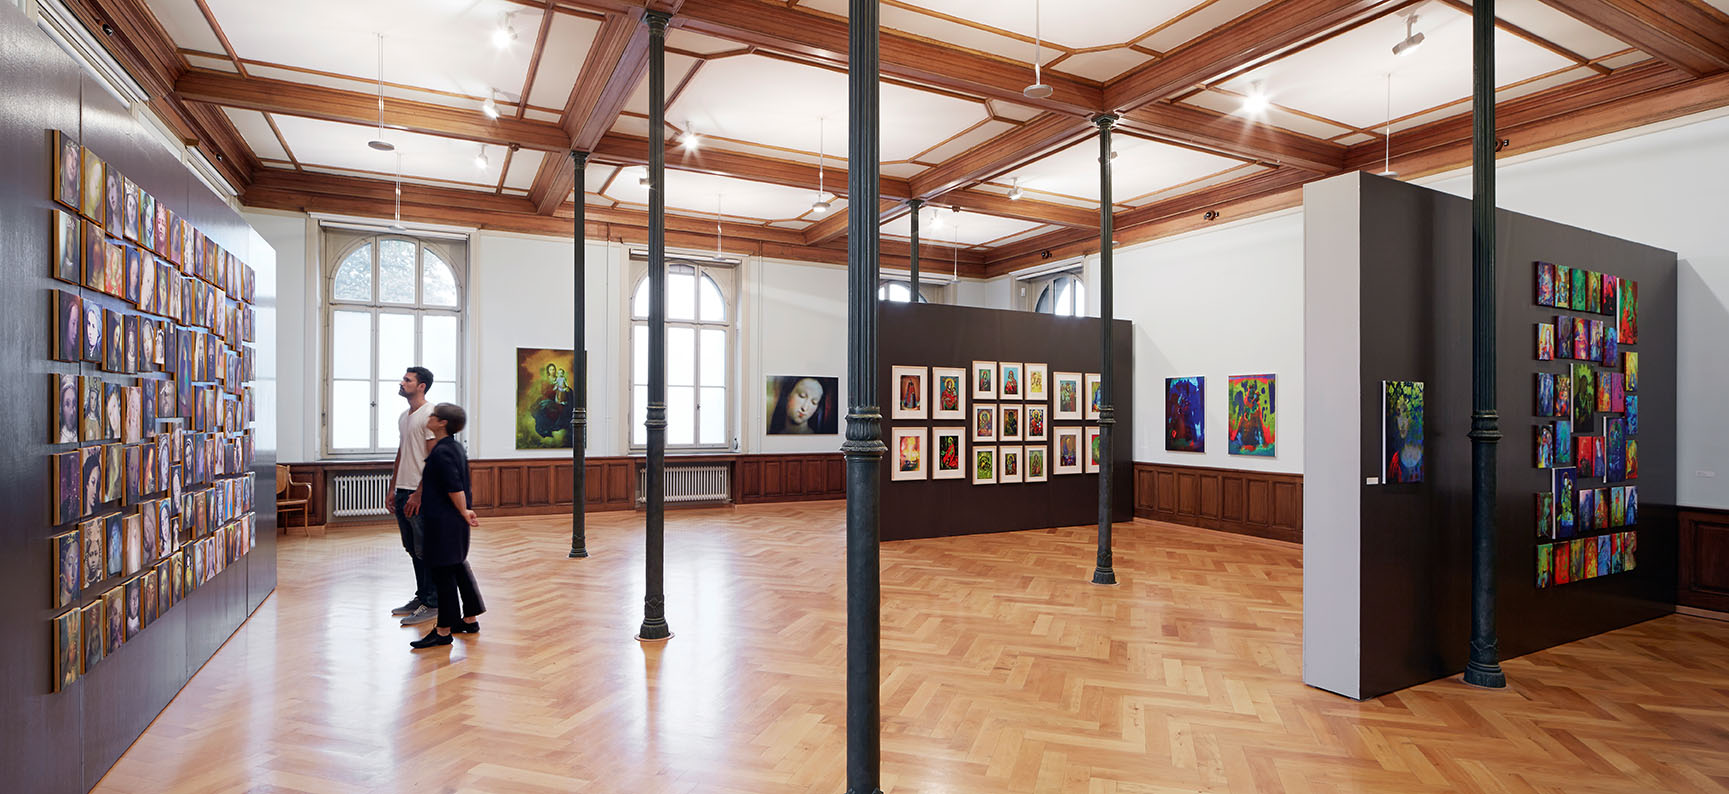 Exhibition space of ETH Zurich’s Collection of Prints and Drawings